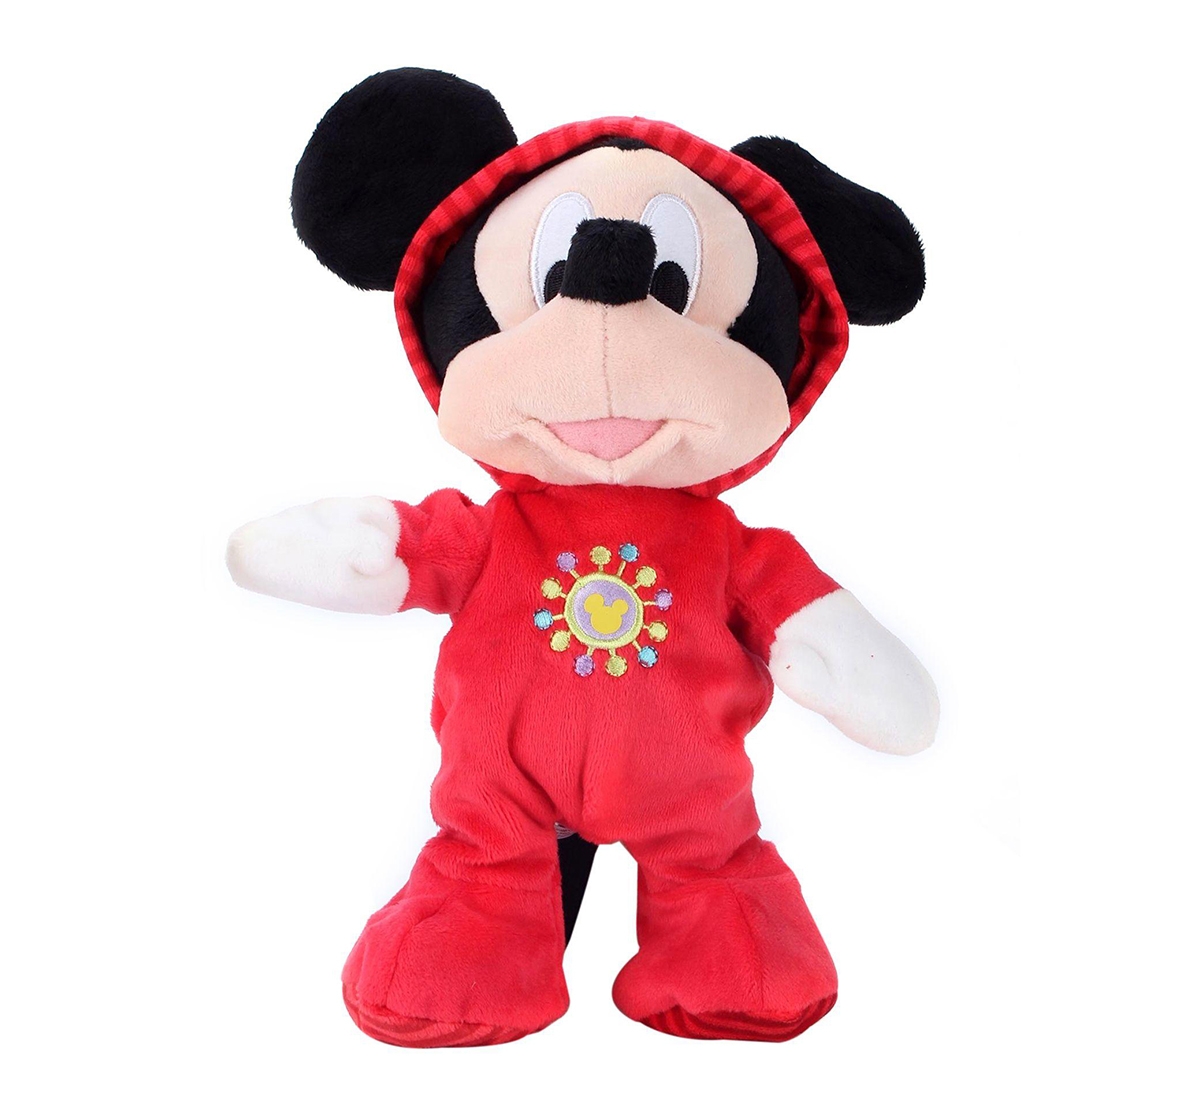 Disney | Disney Mickey Cheeky In Rompersuit 10" Soft Toy for Kids age 1Y+ (Red)